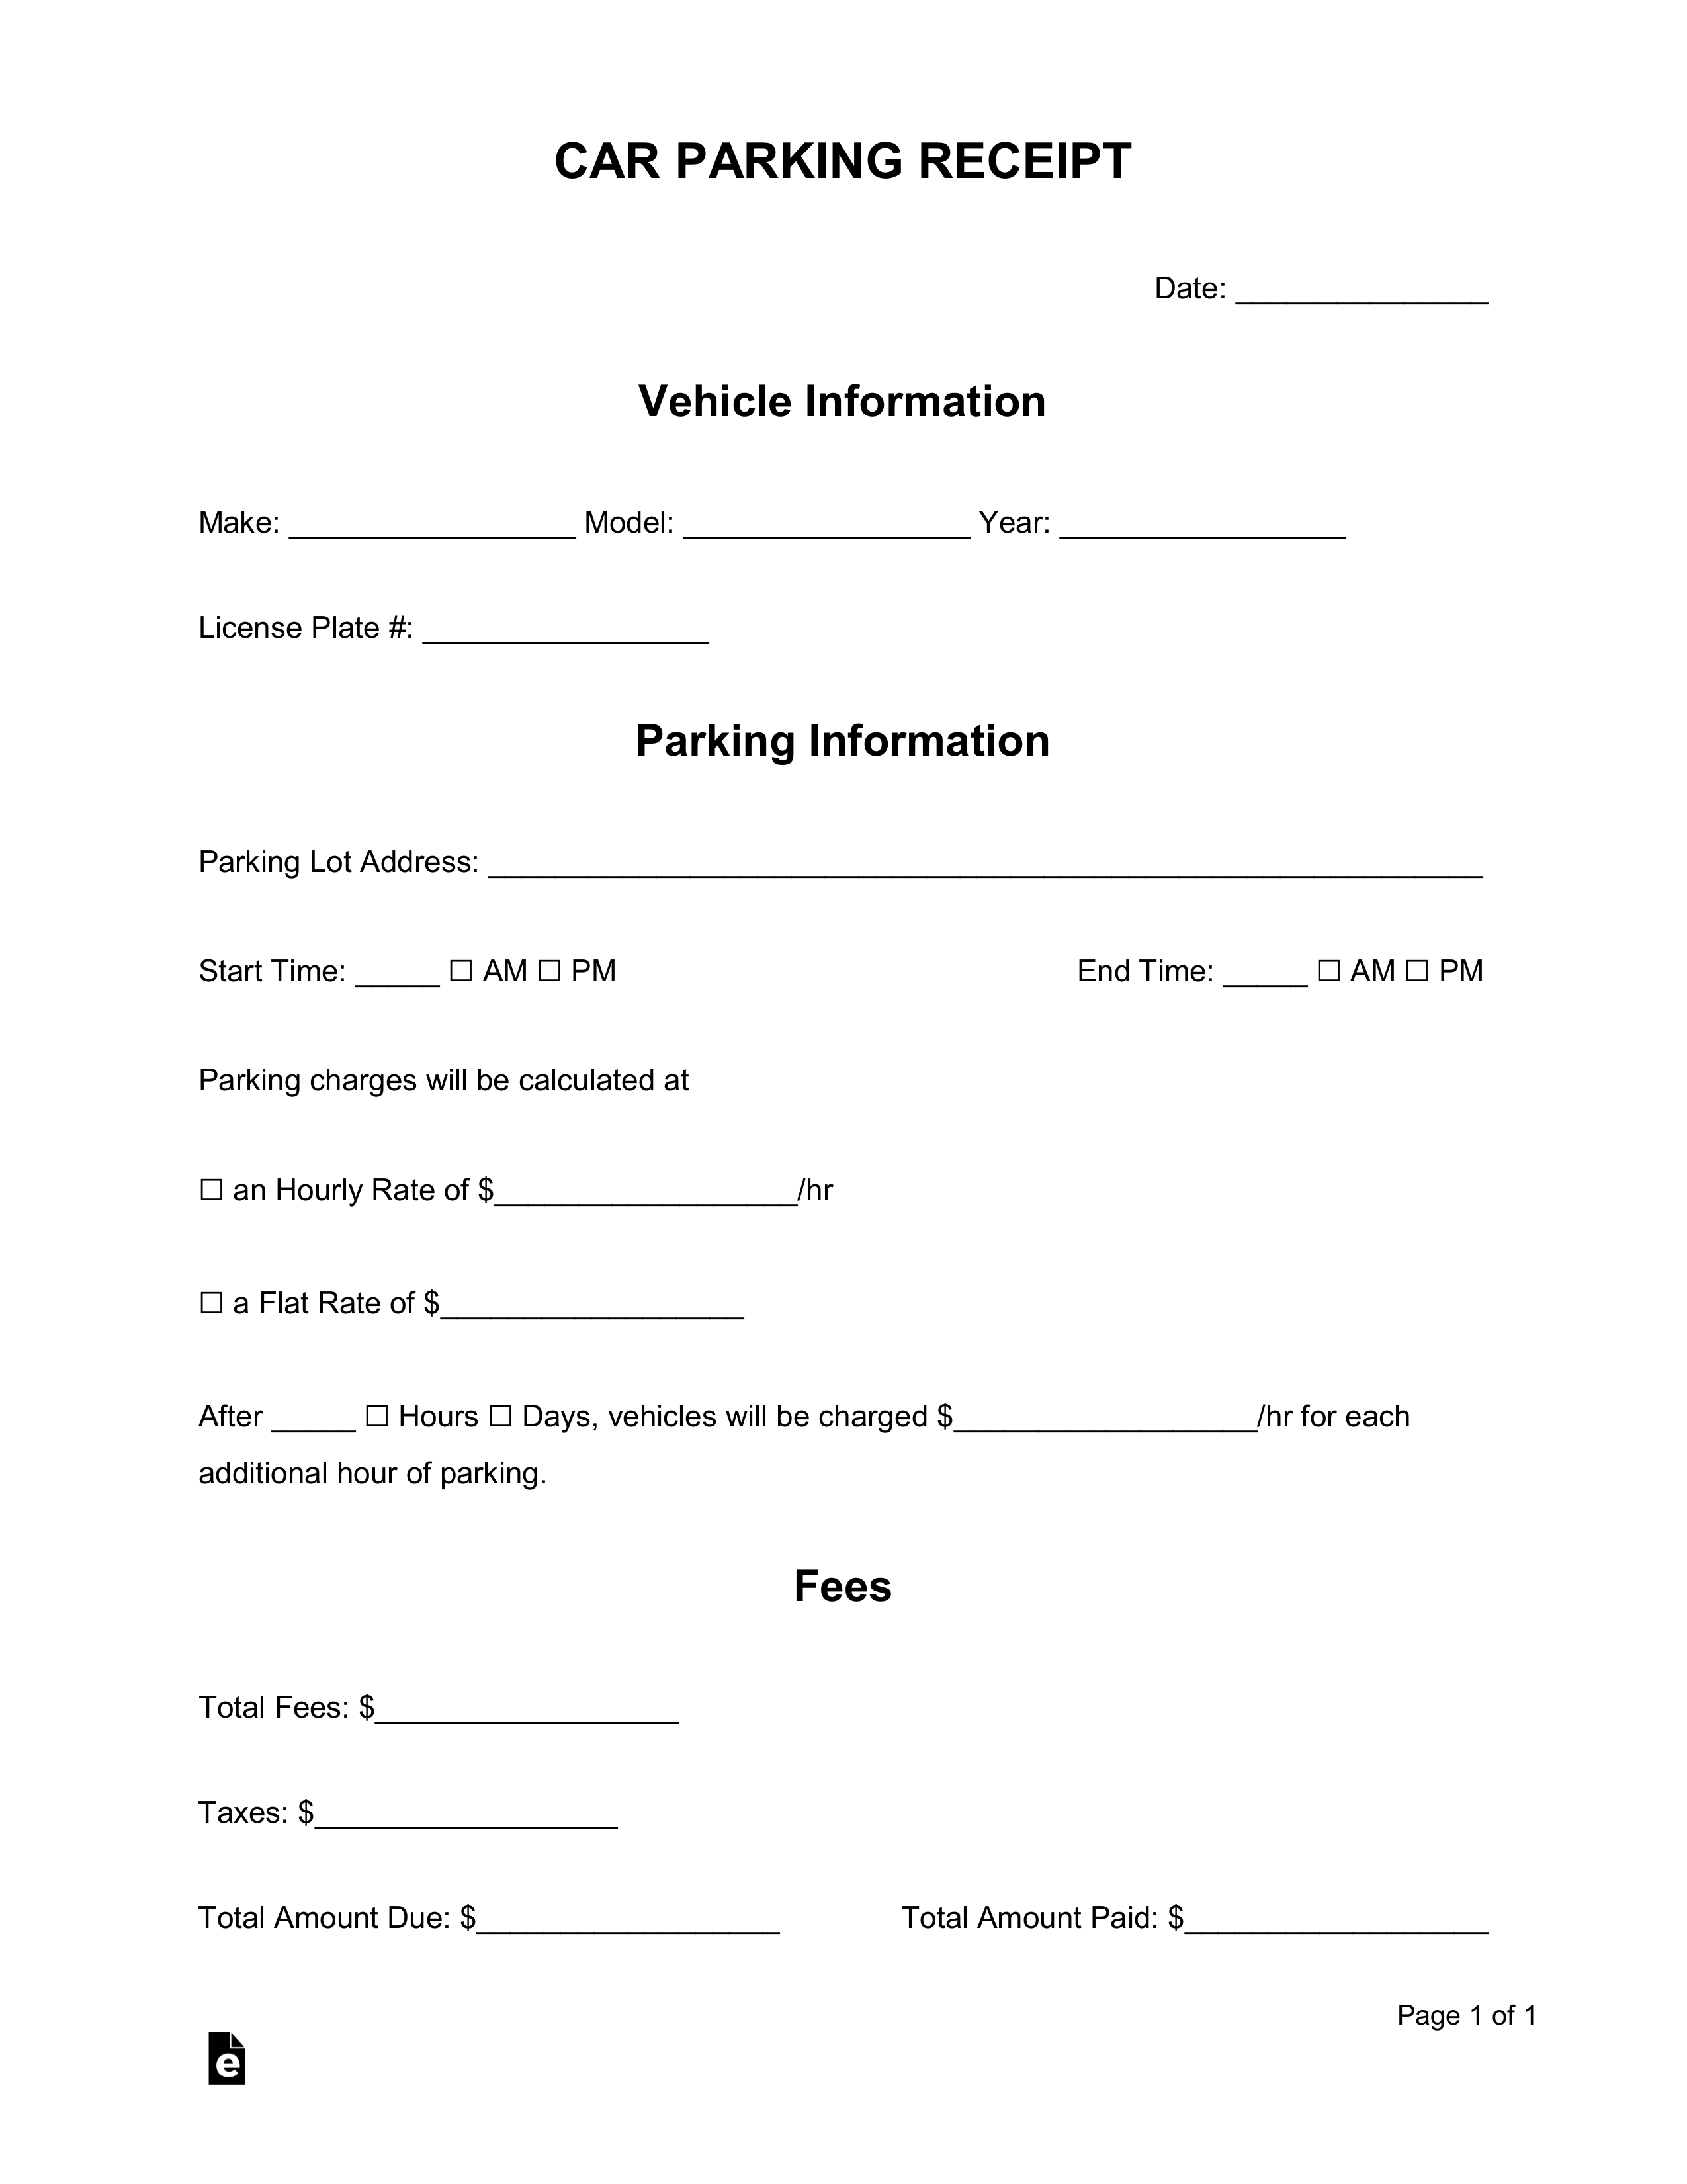 Free Car Vehicle Parking Receipt Template PDF Word EForms